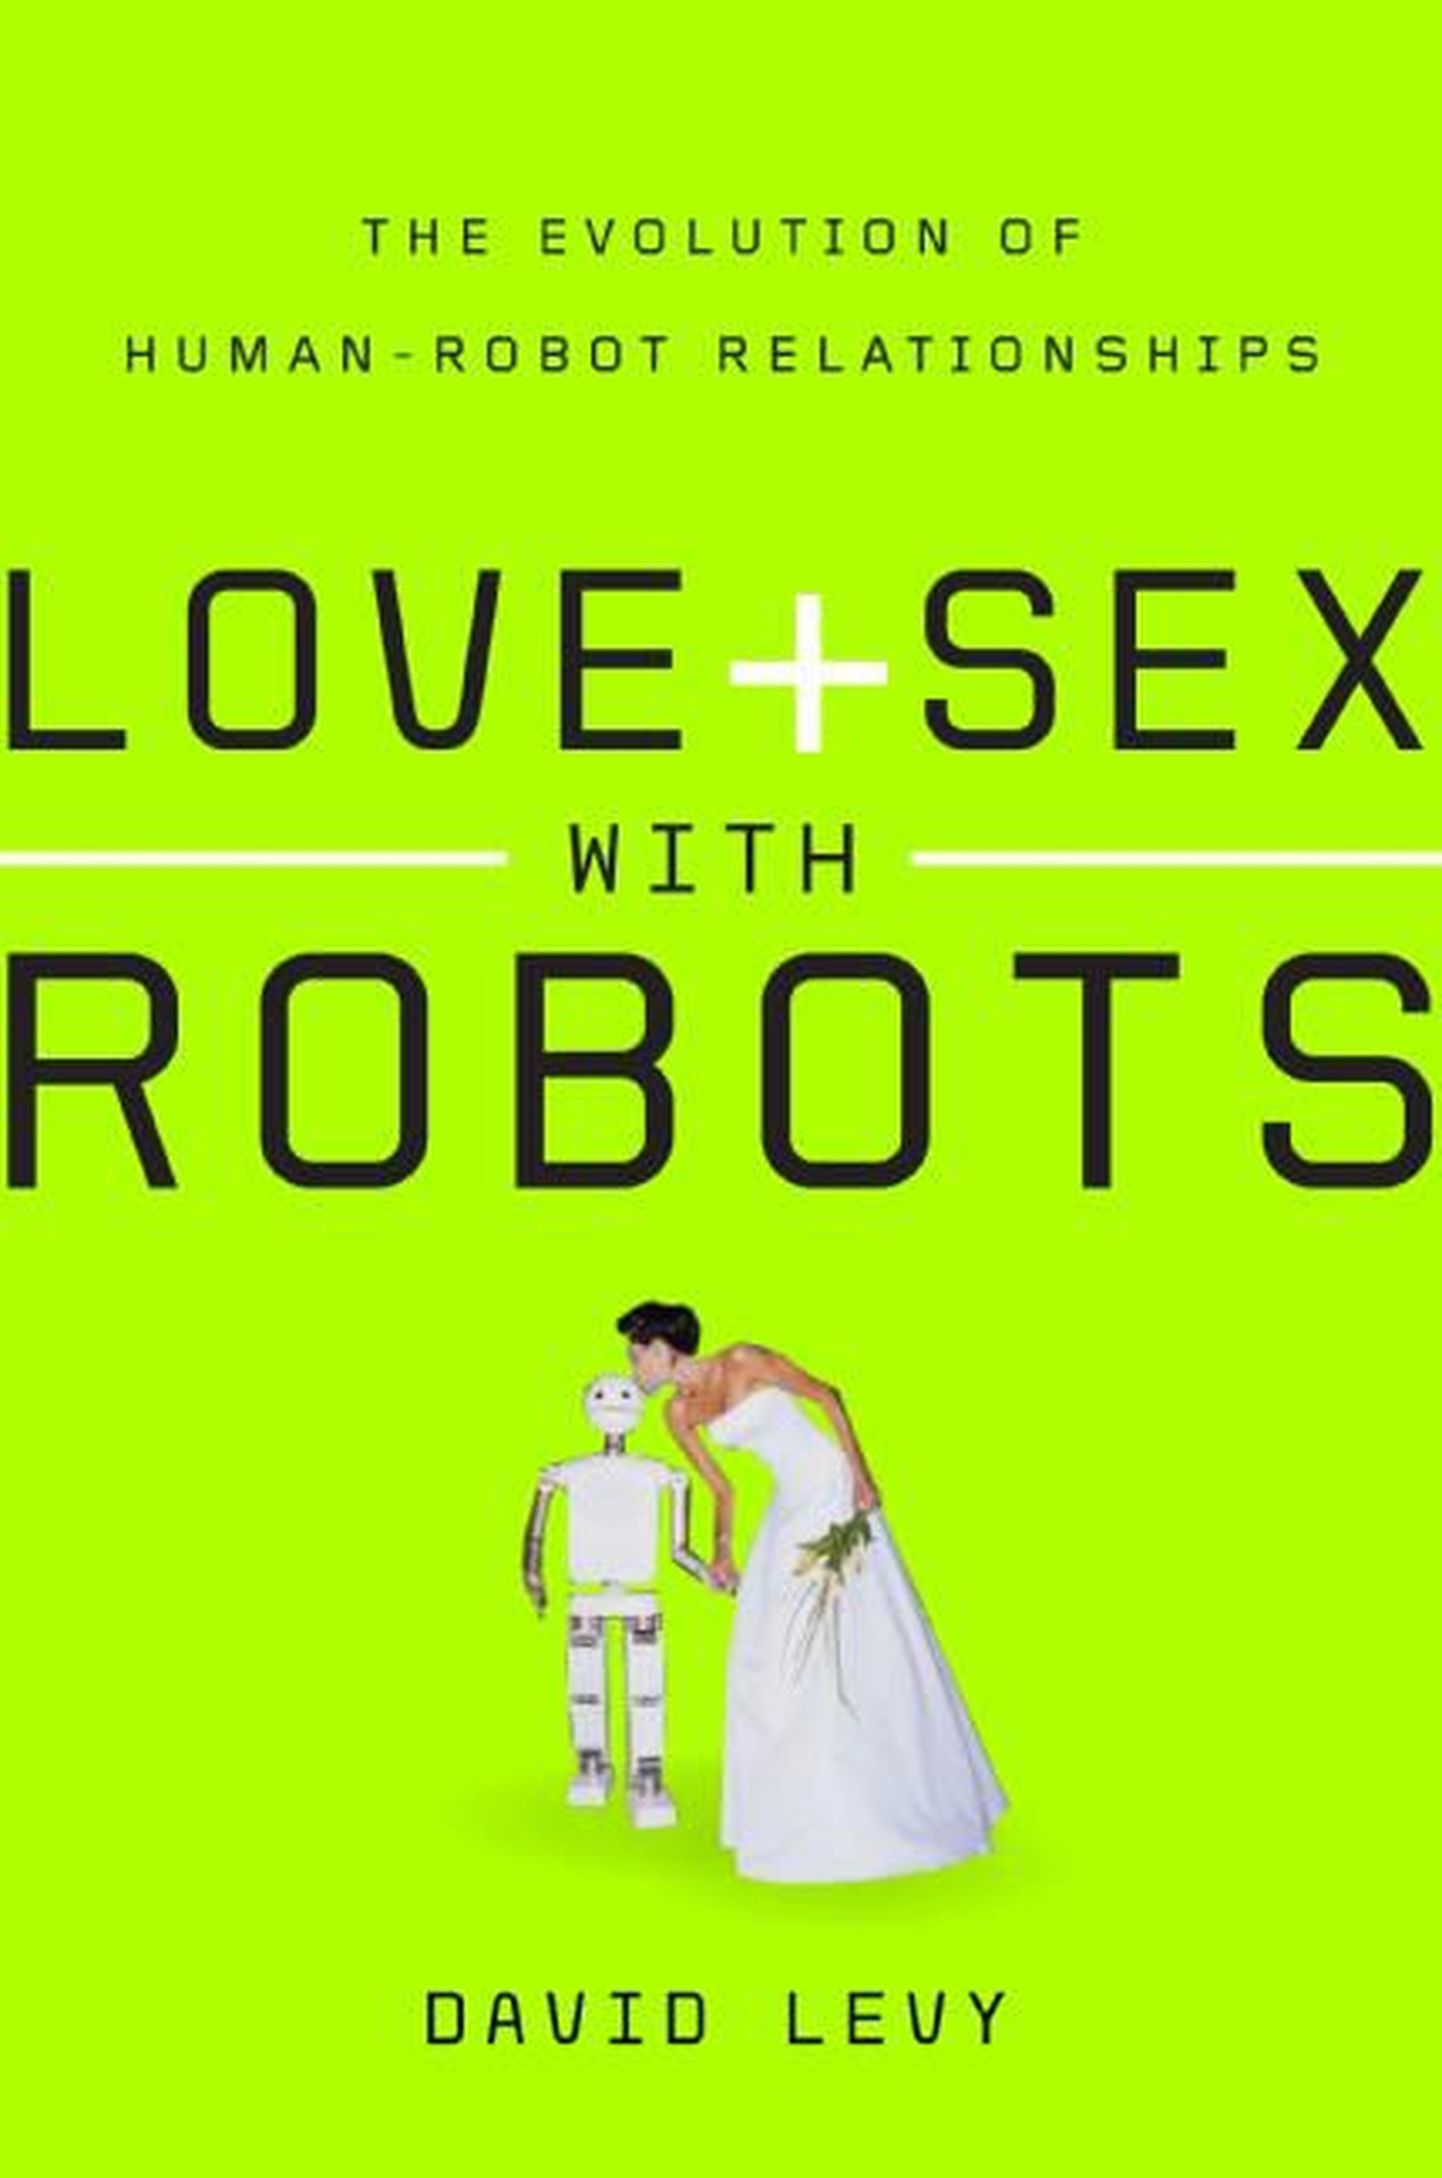 David Levy raamat «Love and Sex with Robots». Foto on illustratiivne.